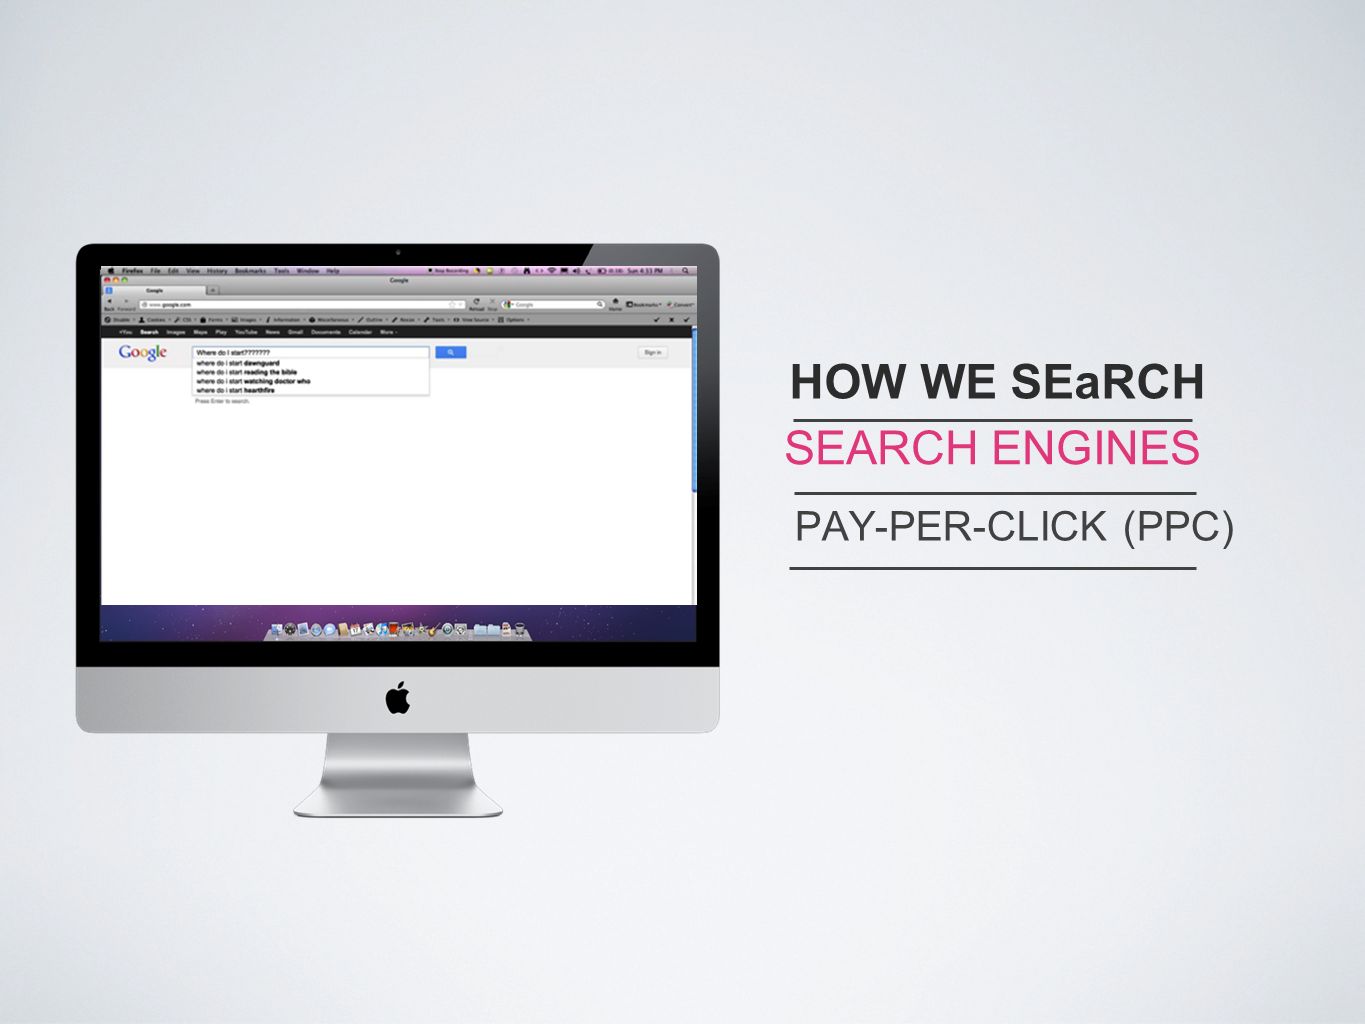 HOW WE SEaRCH SEARCH ENGINES PAY-PER-CLICK (PPC)